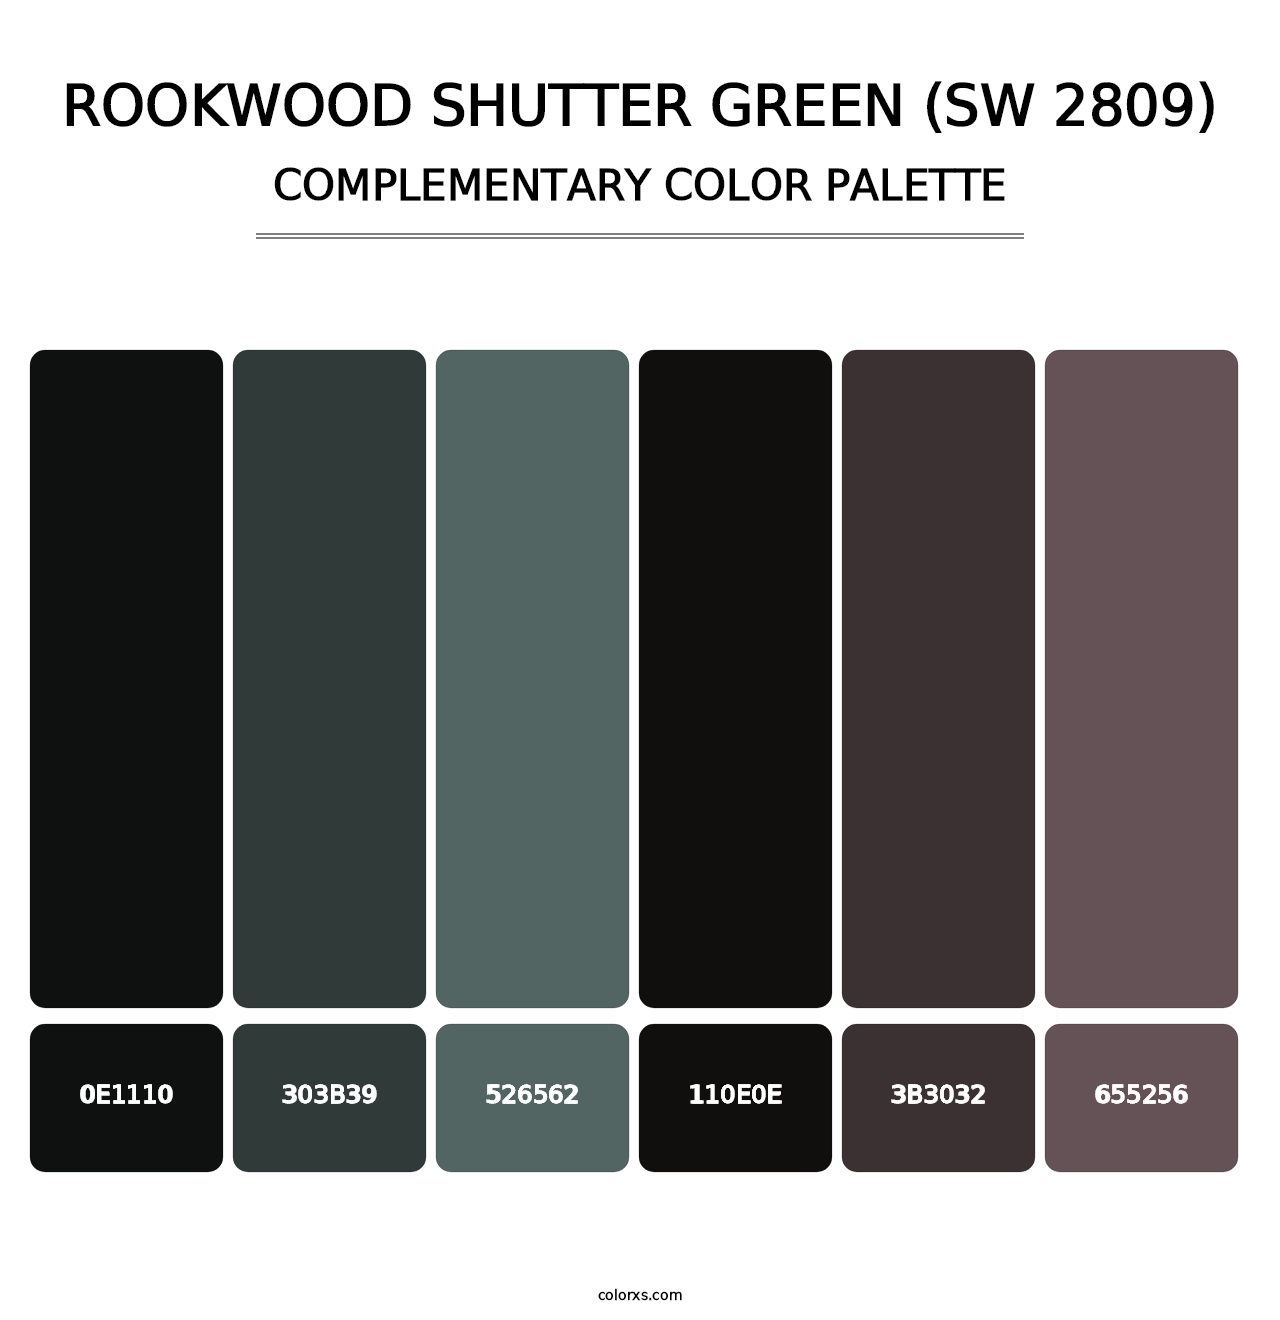 Rookwood Shutter Green (SW 2809) - Complementary Color Palette